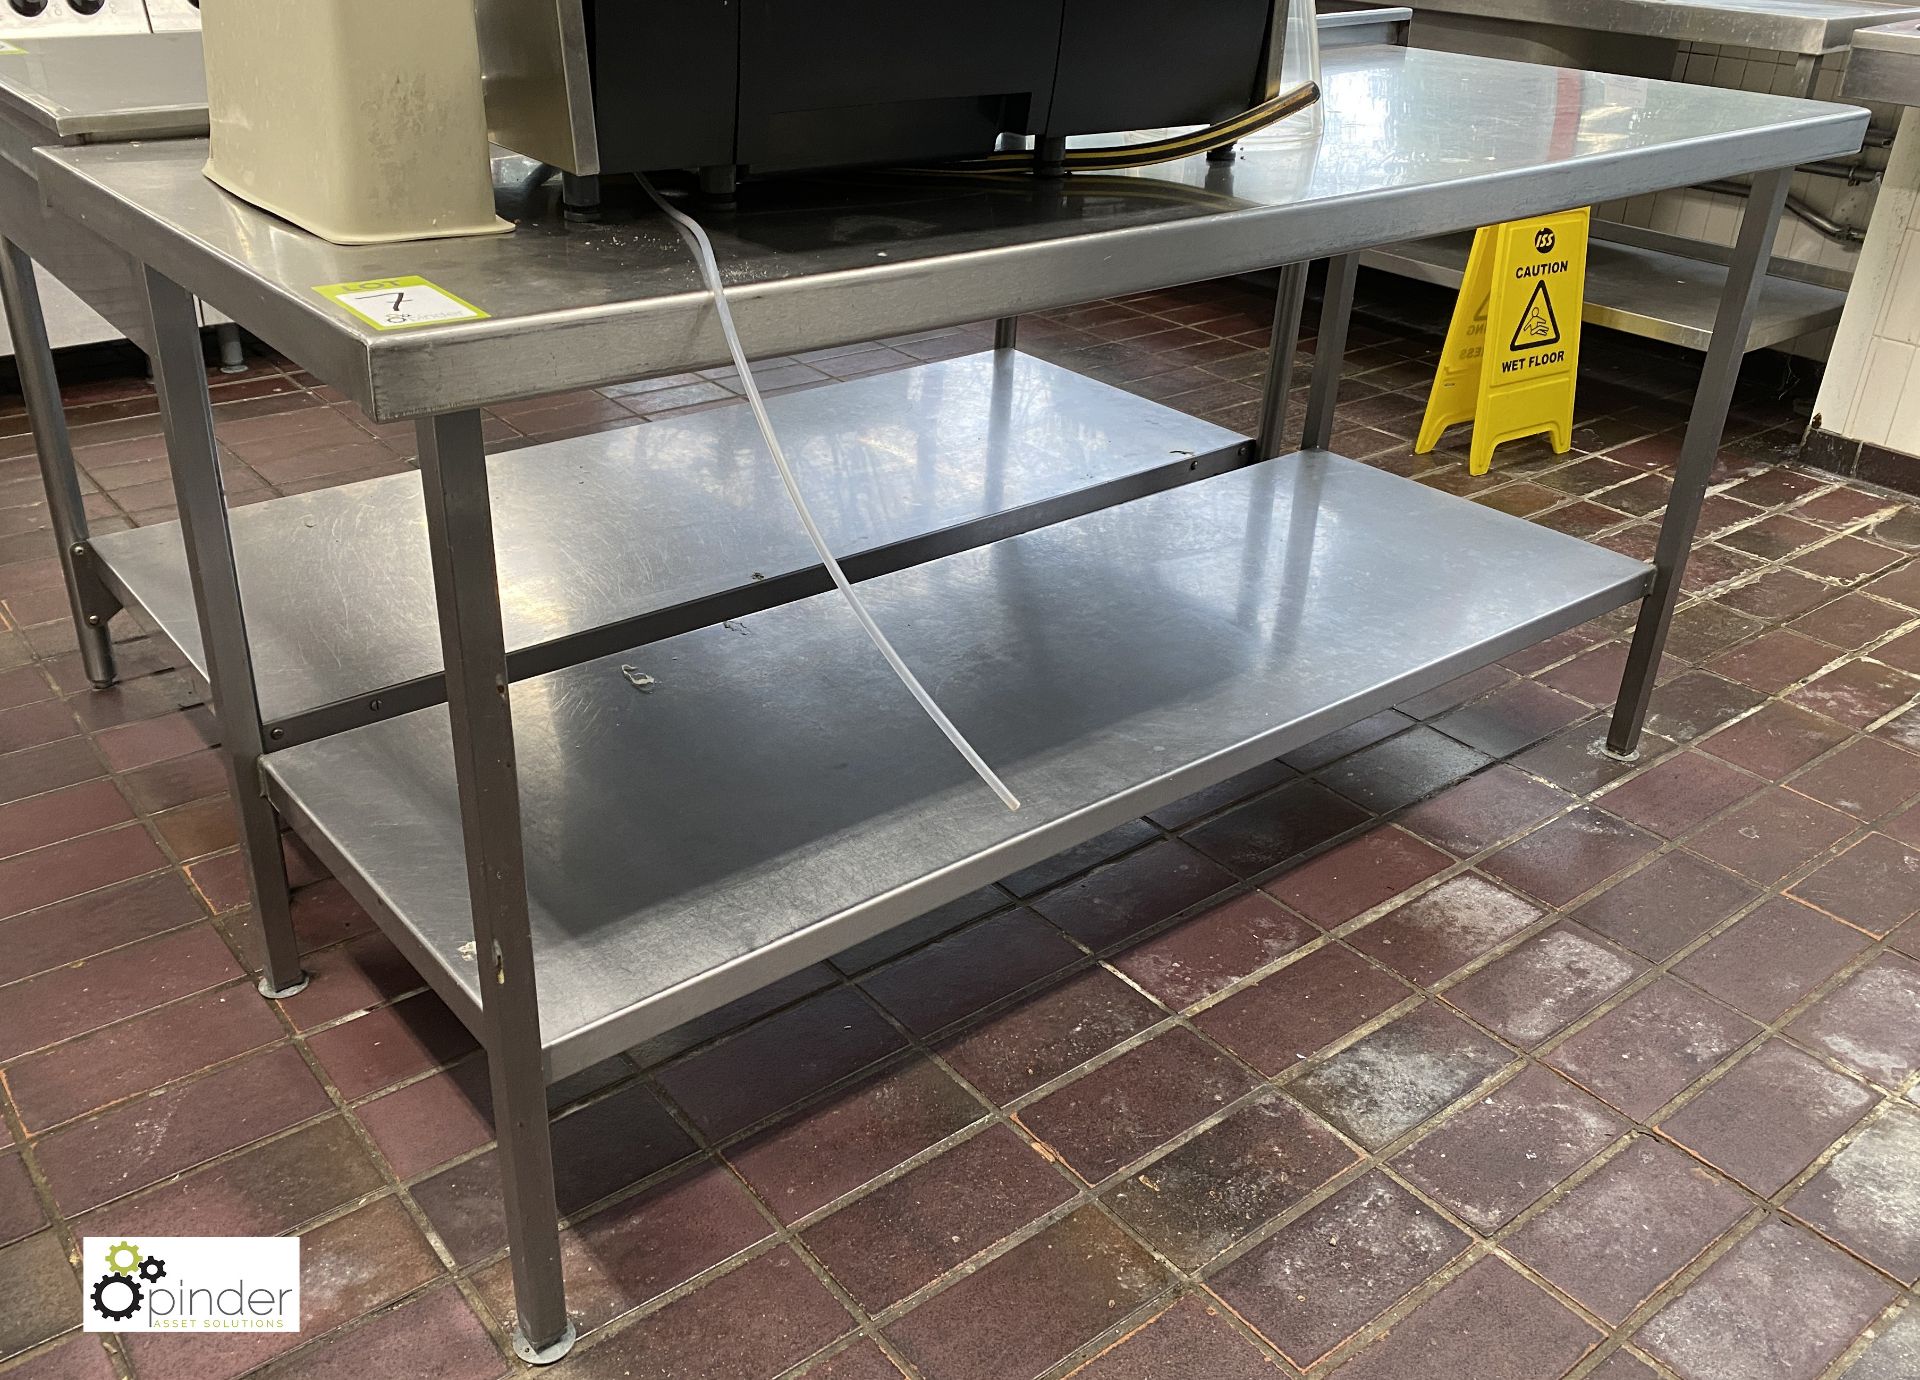 Stainless steel Preparation Table, 1750mm x 690mm x 850mm, with undershelf